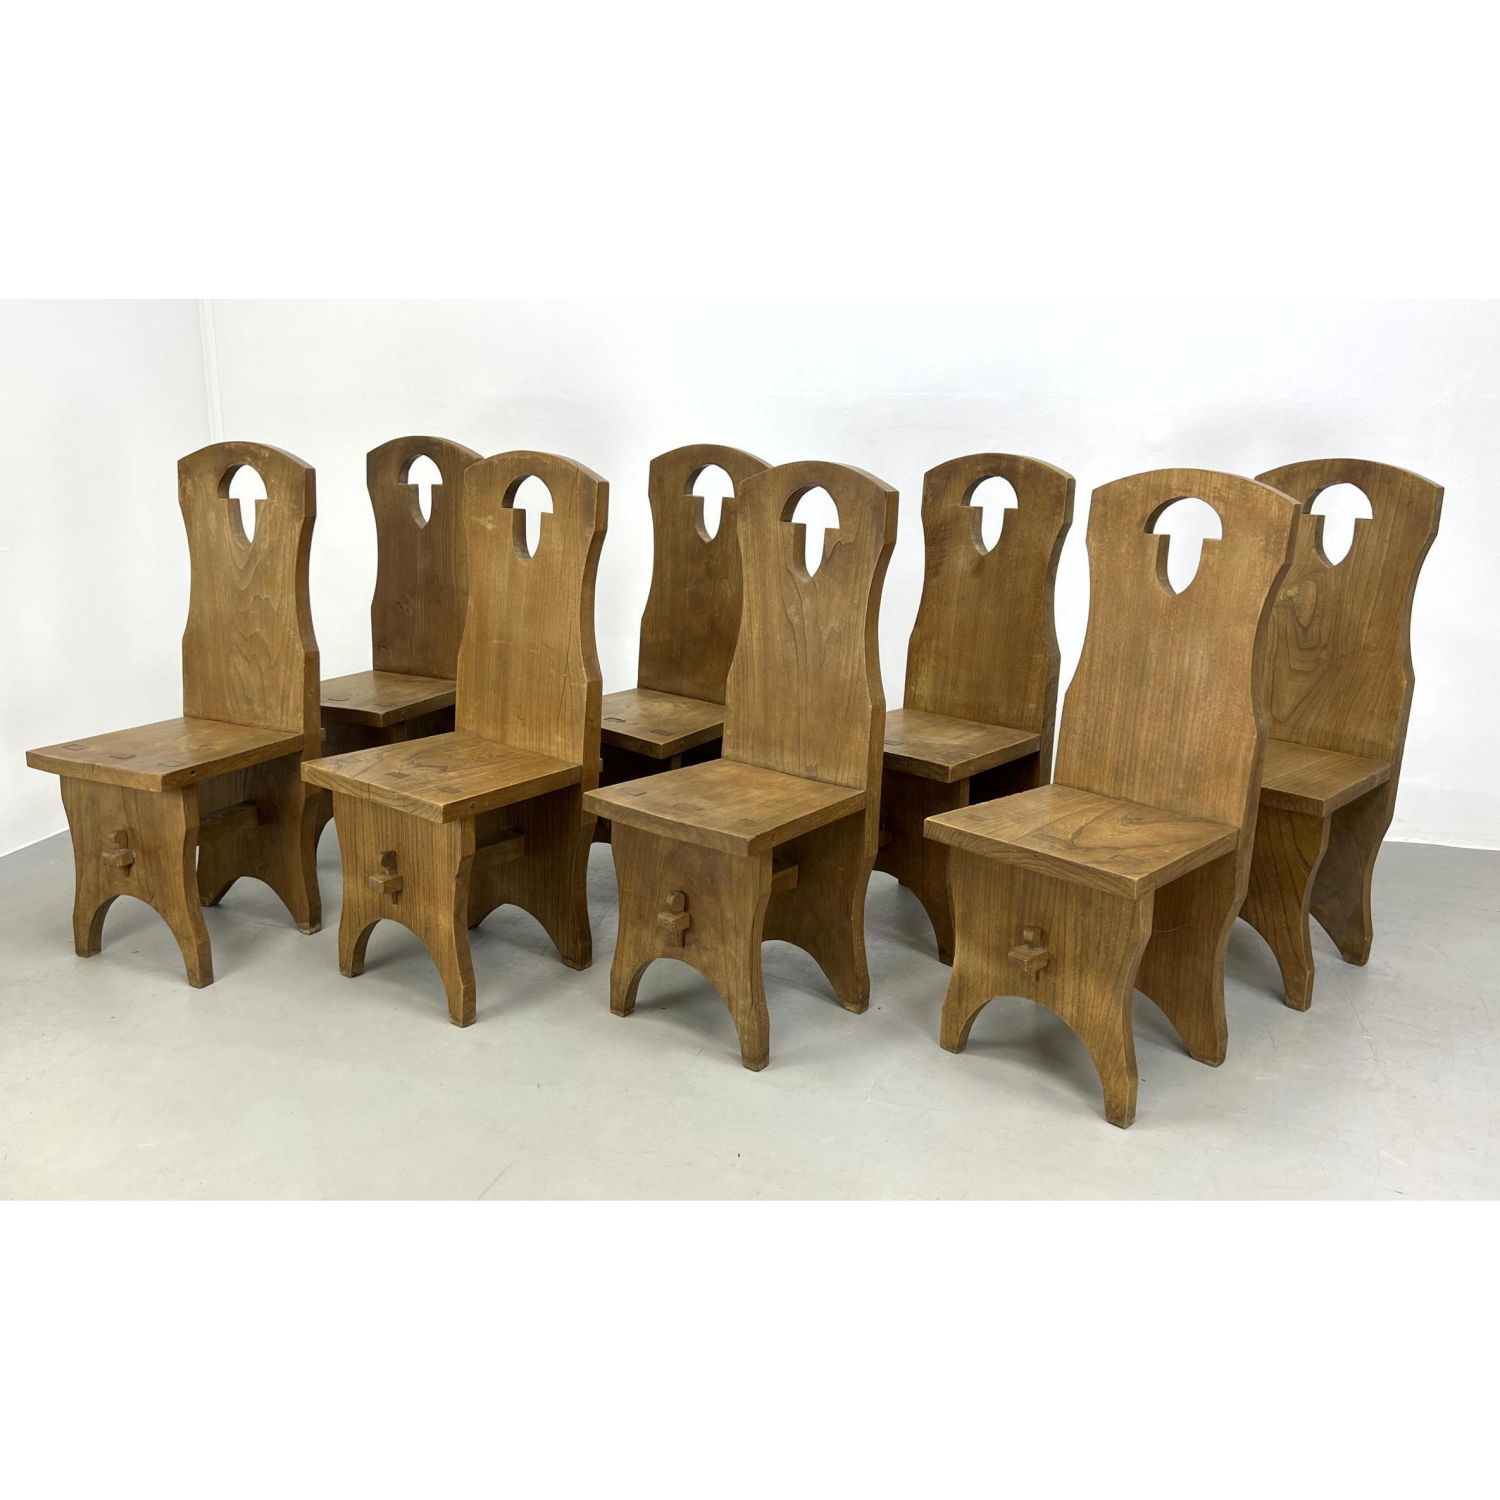 Set 8 Rustic French Brutalist Chairs 2b988f